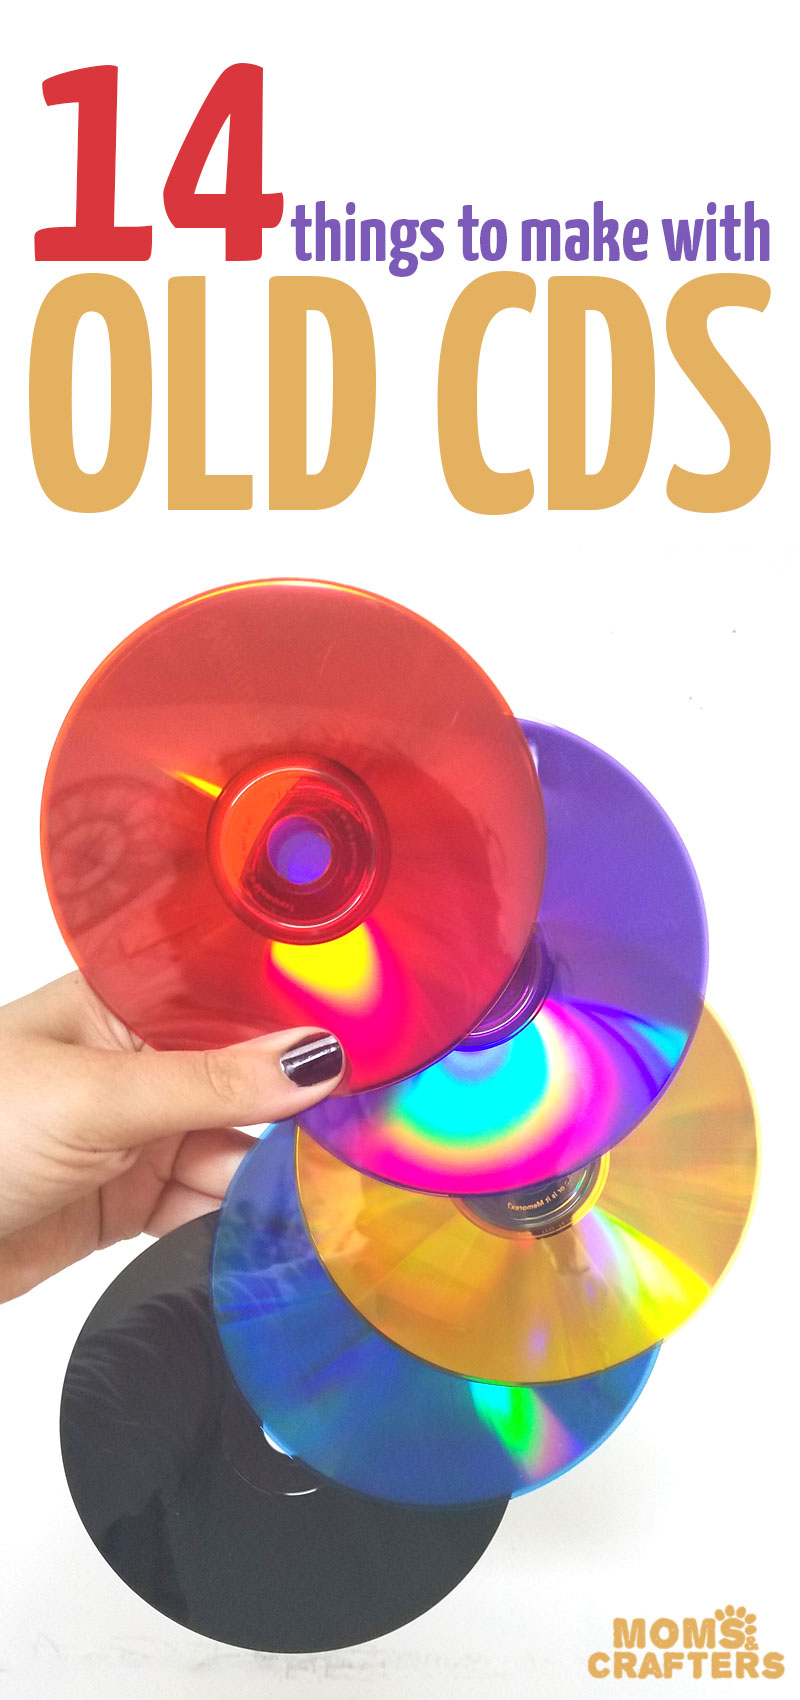 Click here if you have old CDs or DVDs lying around that you'd love to upcycle! These 14 things to do with old CDs include ideas for kids crafts, recycling CDs and DVDs and so many clever ideas! #crafts #upcycle #recycling #diy 